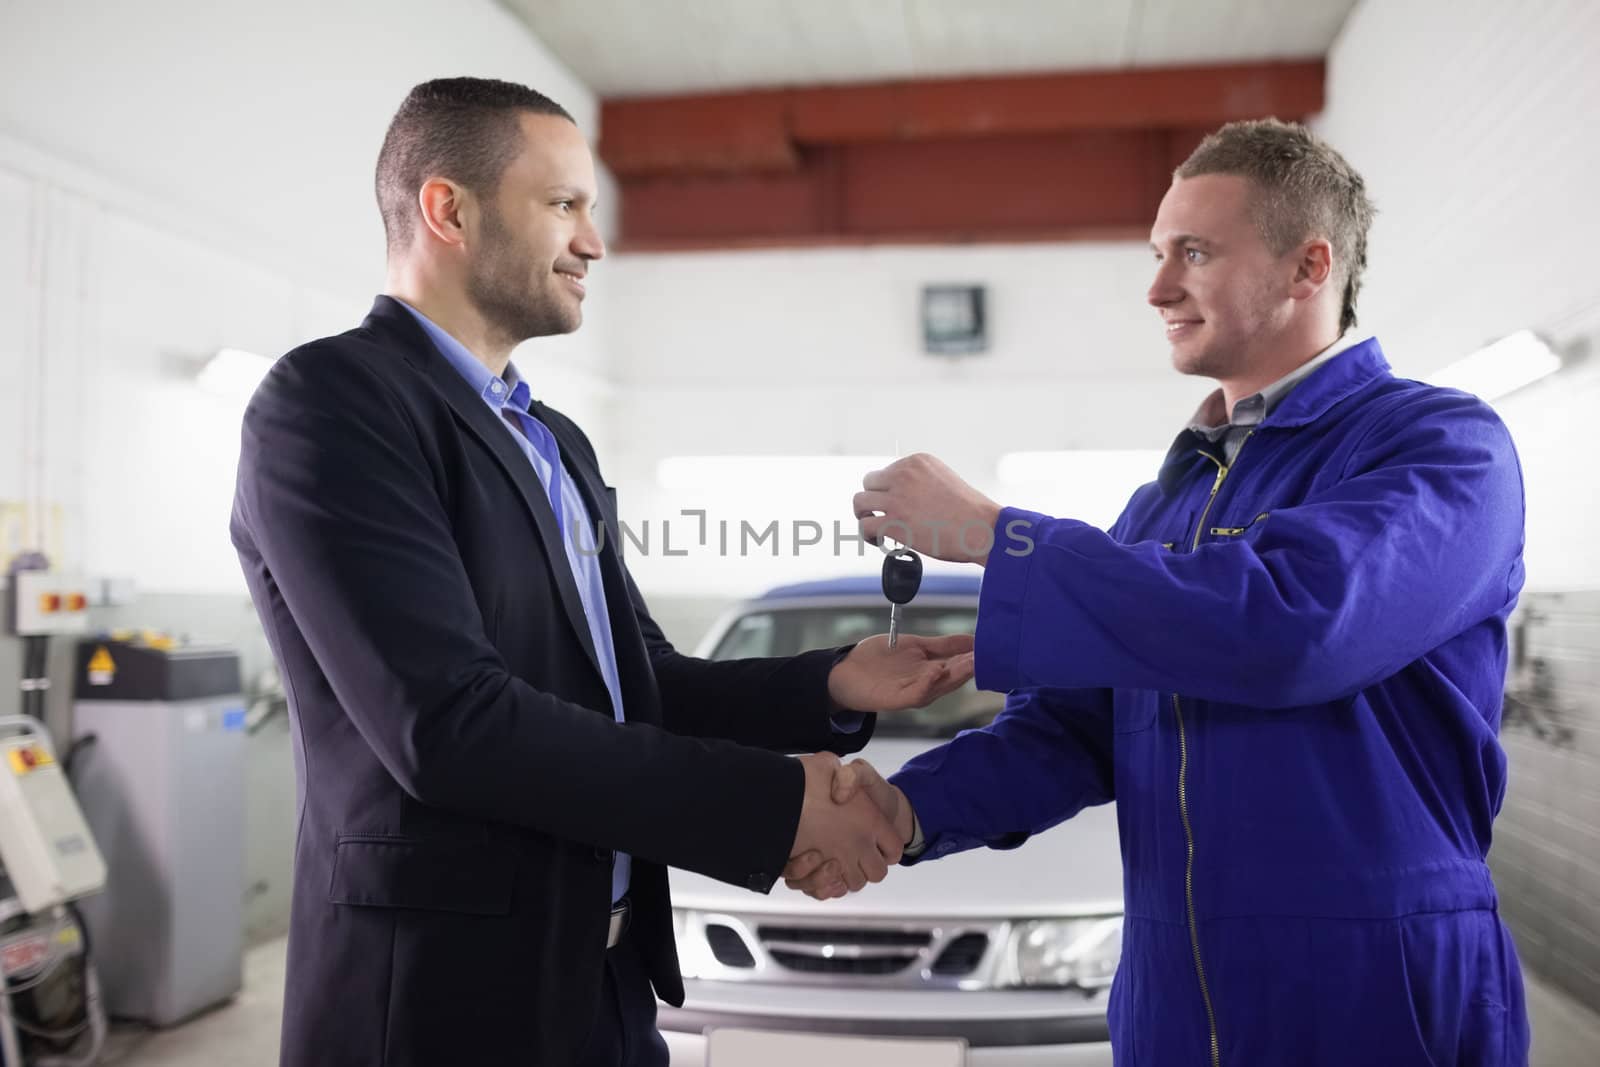 Man receiving car key while shaking hand to a mechanic in a garage